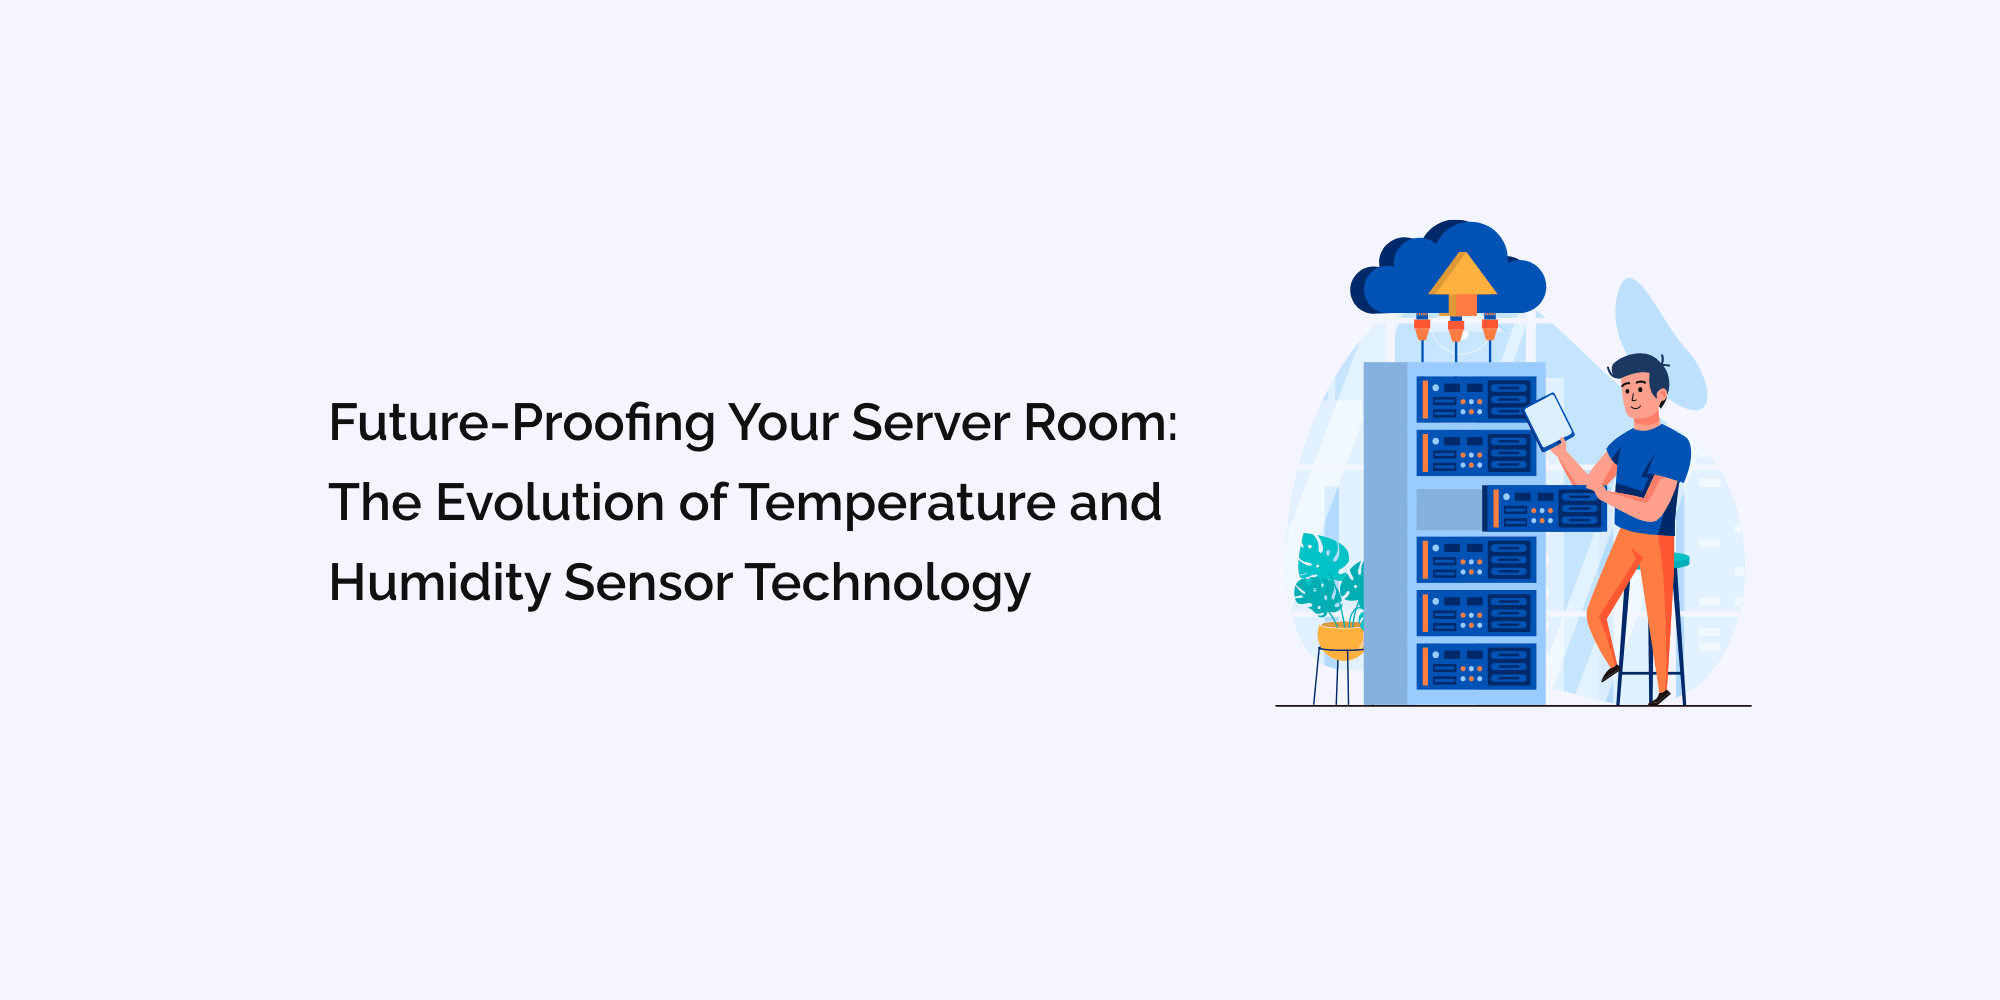 Future-Proofing Your Server Room: The Evolution of Temperature and Humidity Sensor Technology